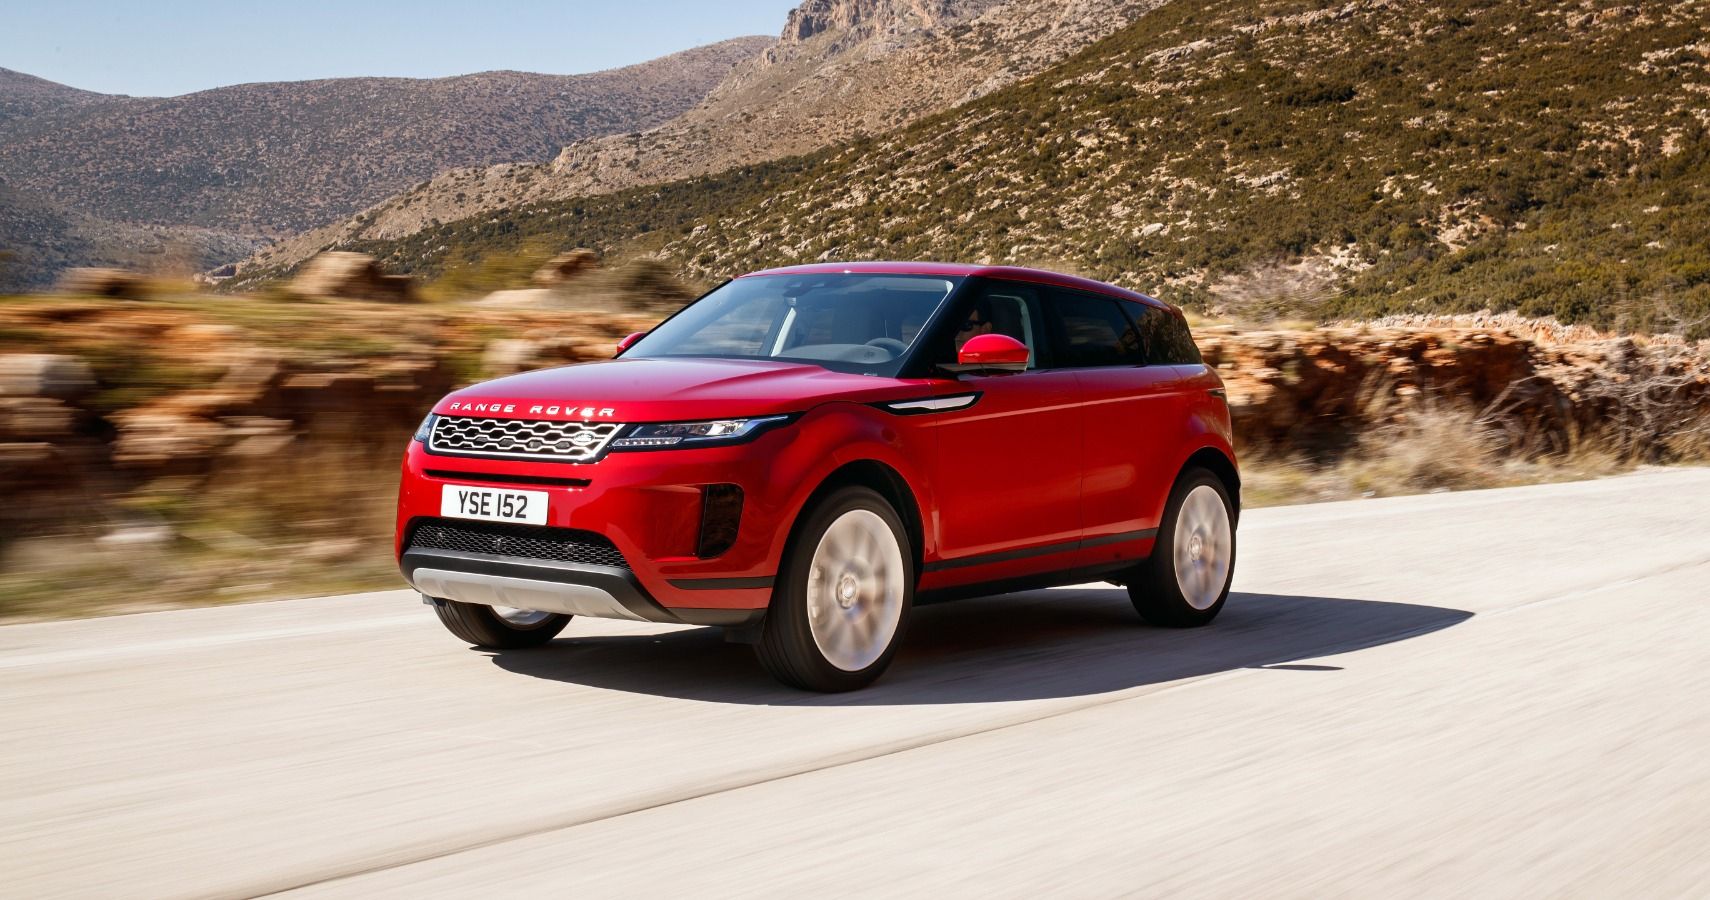 Red Range Rover Evoque driving